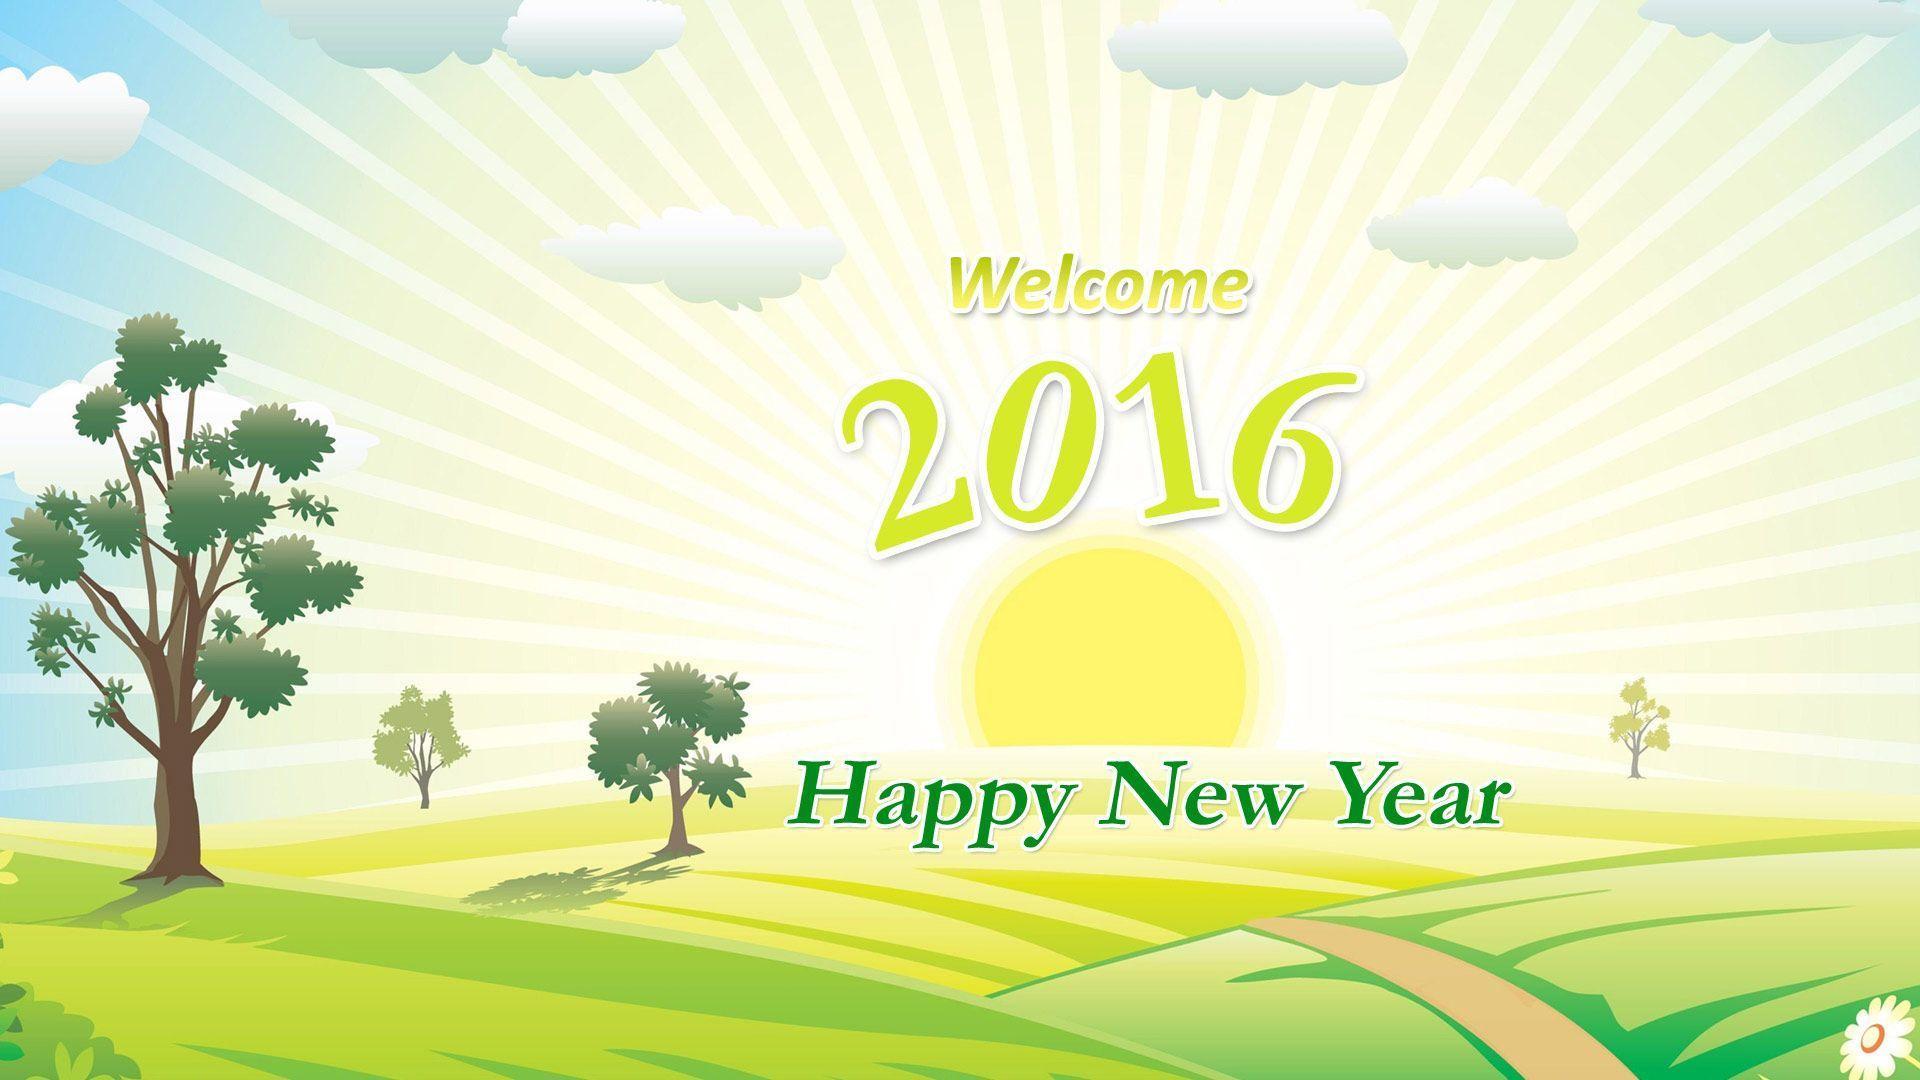 Happy New Year welcome 2016 wallpaper